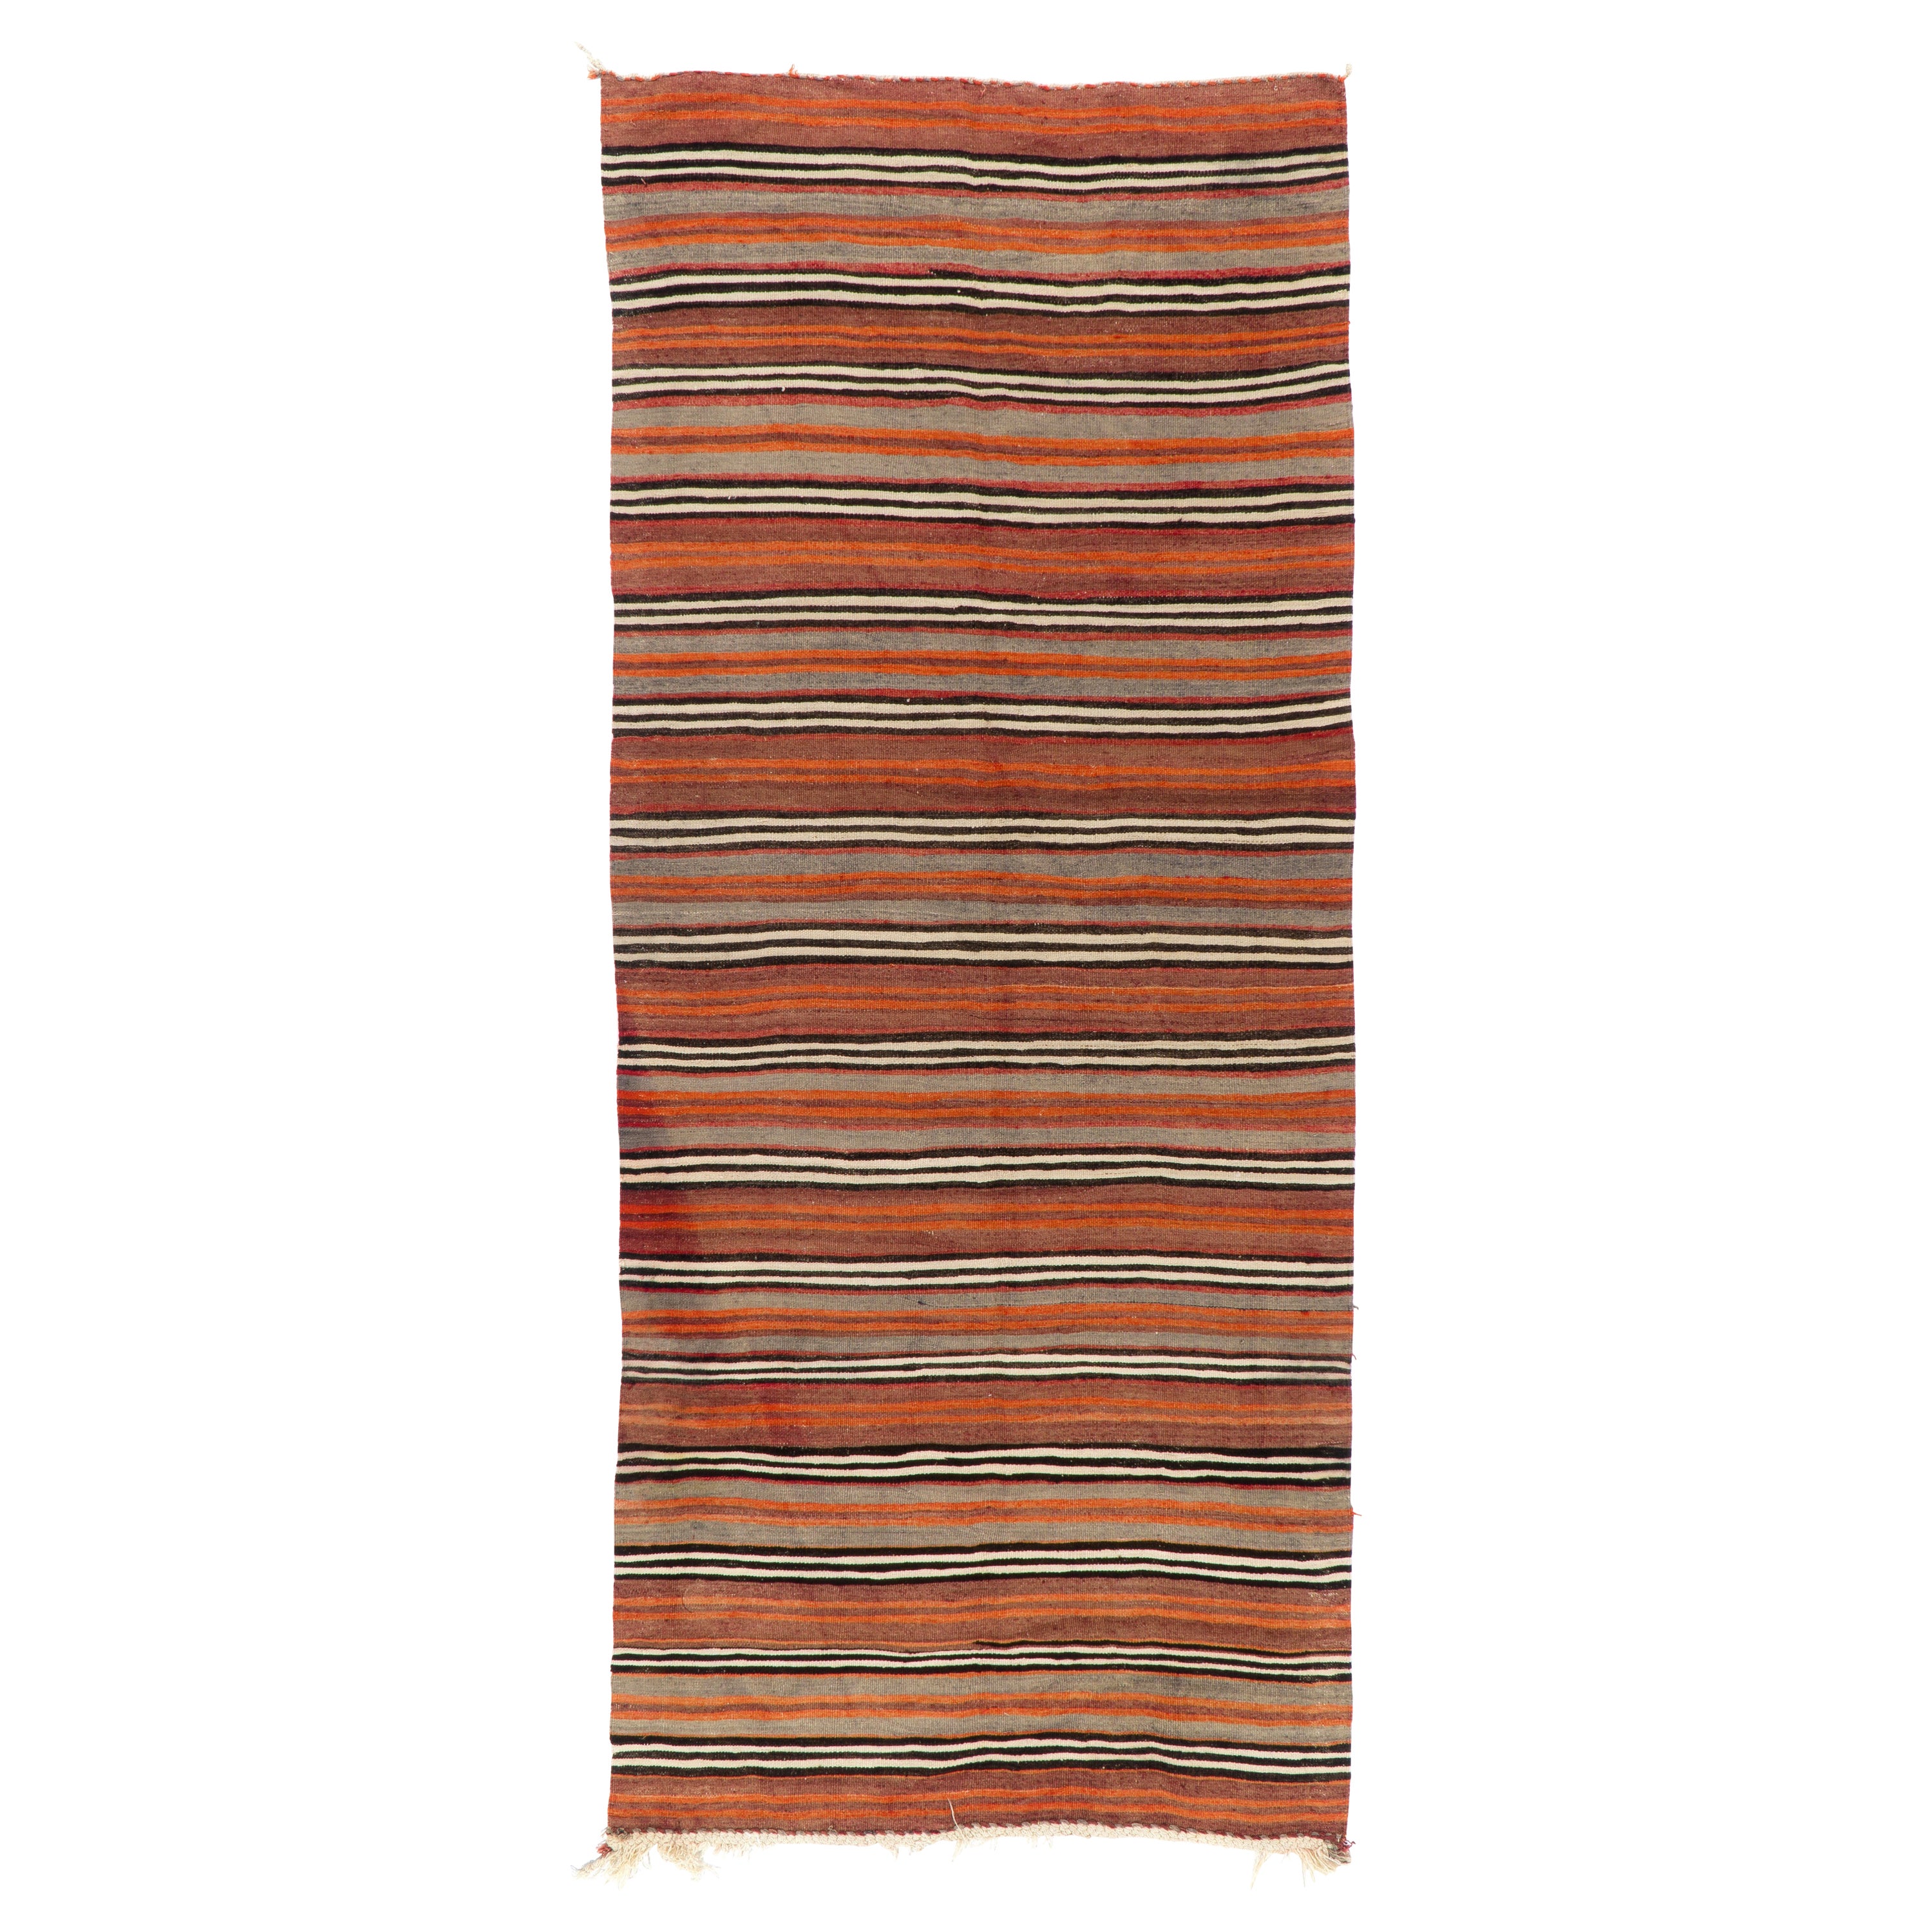 4.7x10.8 Ft Nomadic Vintage Striped Handwoven Anatolian Wool Kilim 'Flat Weave' For Sale